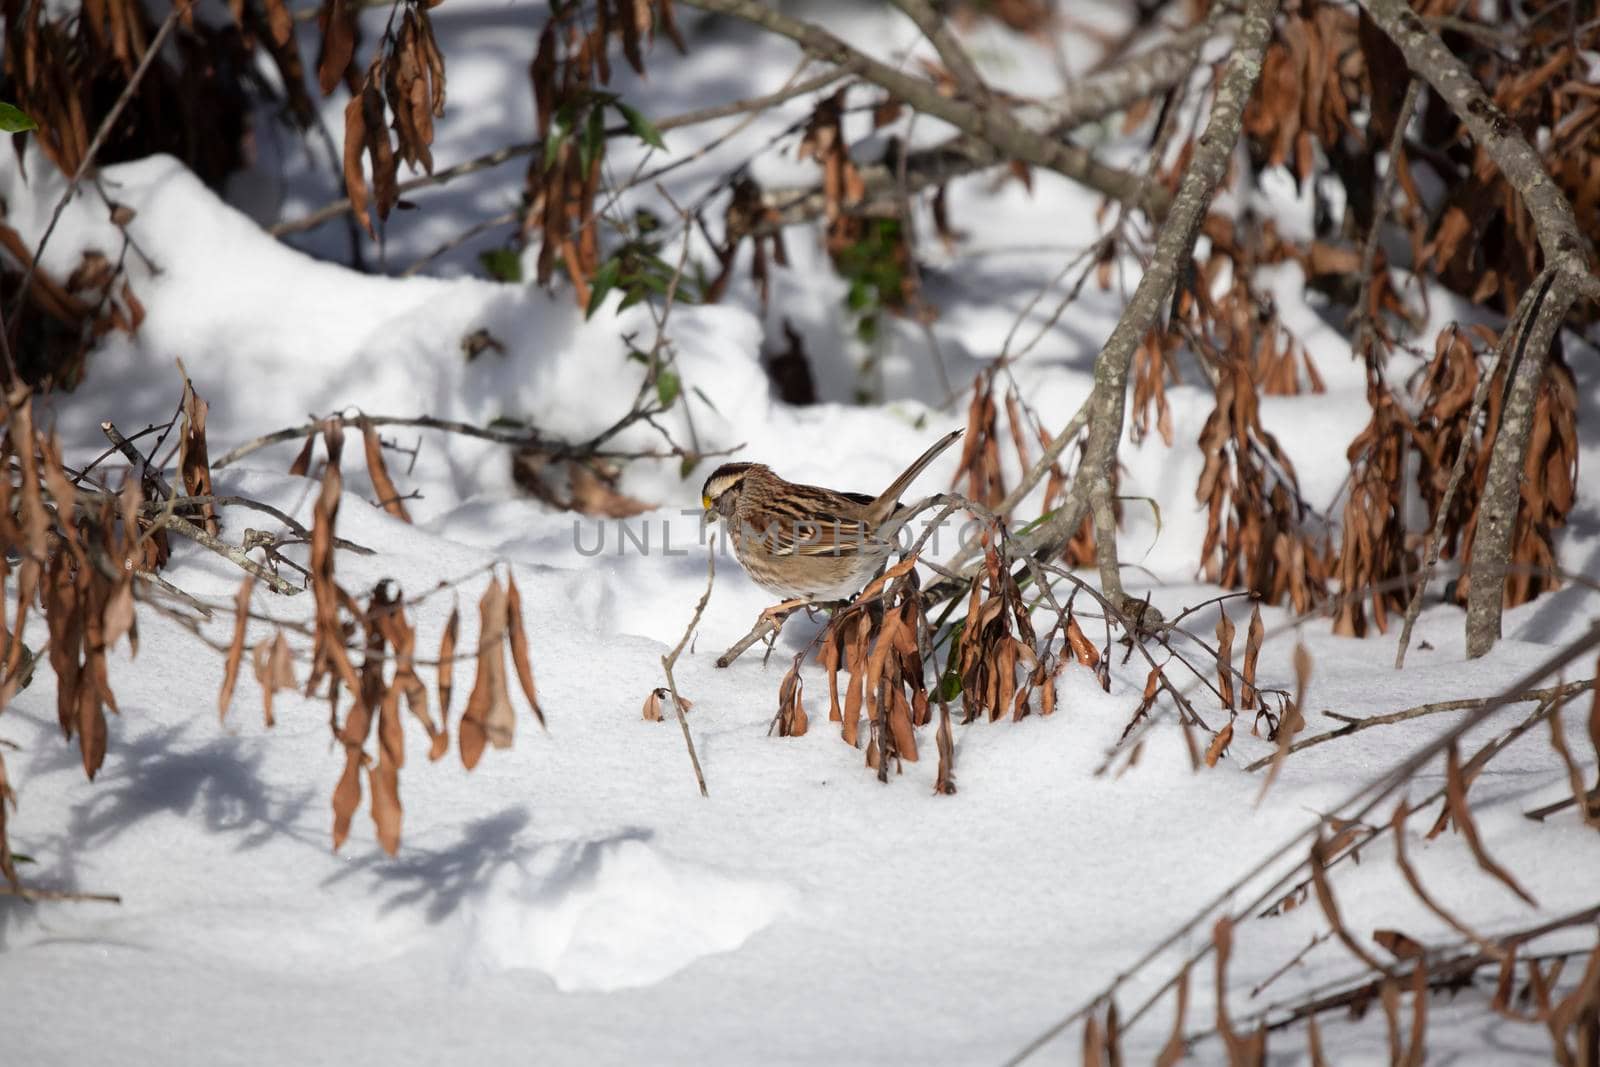 White-throated sparrow (Zonotrichia albicollis) foraging from its perch on a fallen tree limb on a snowy day